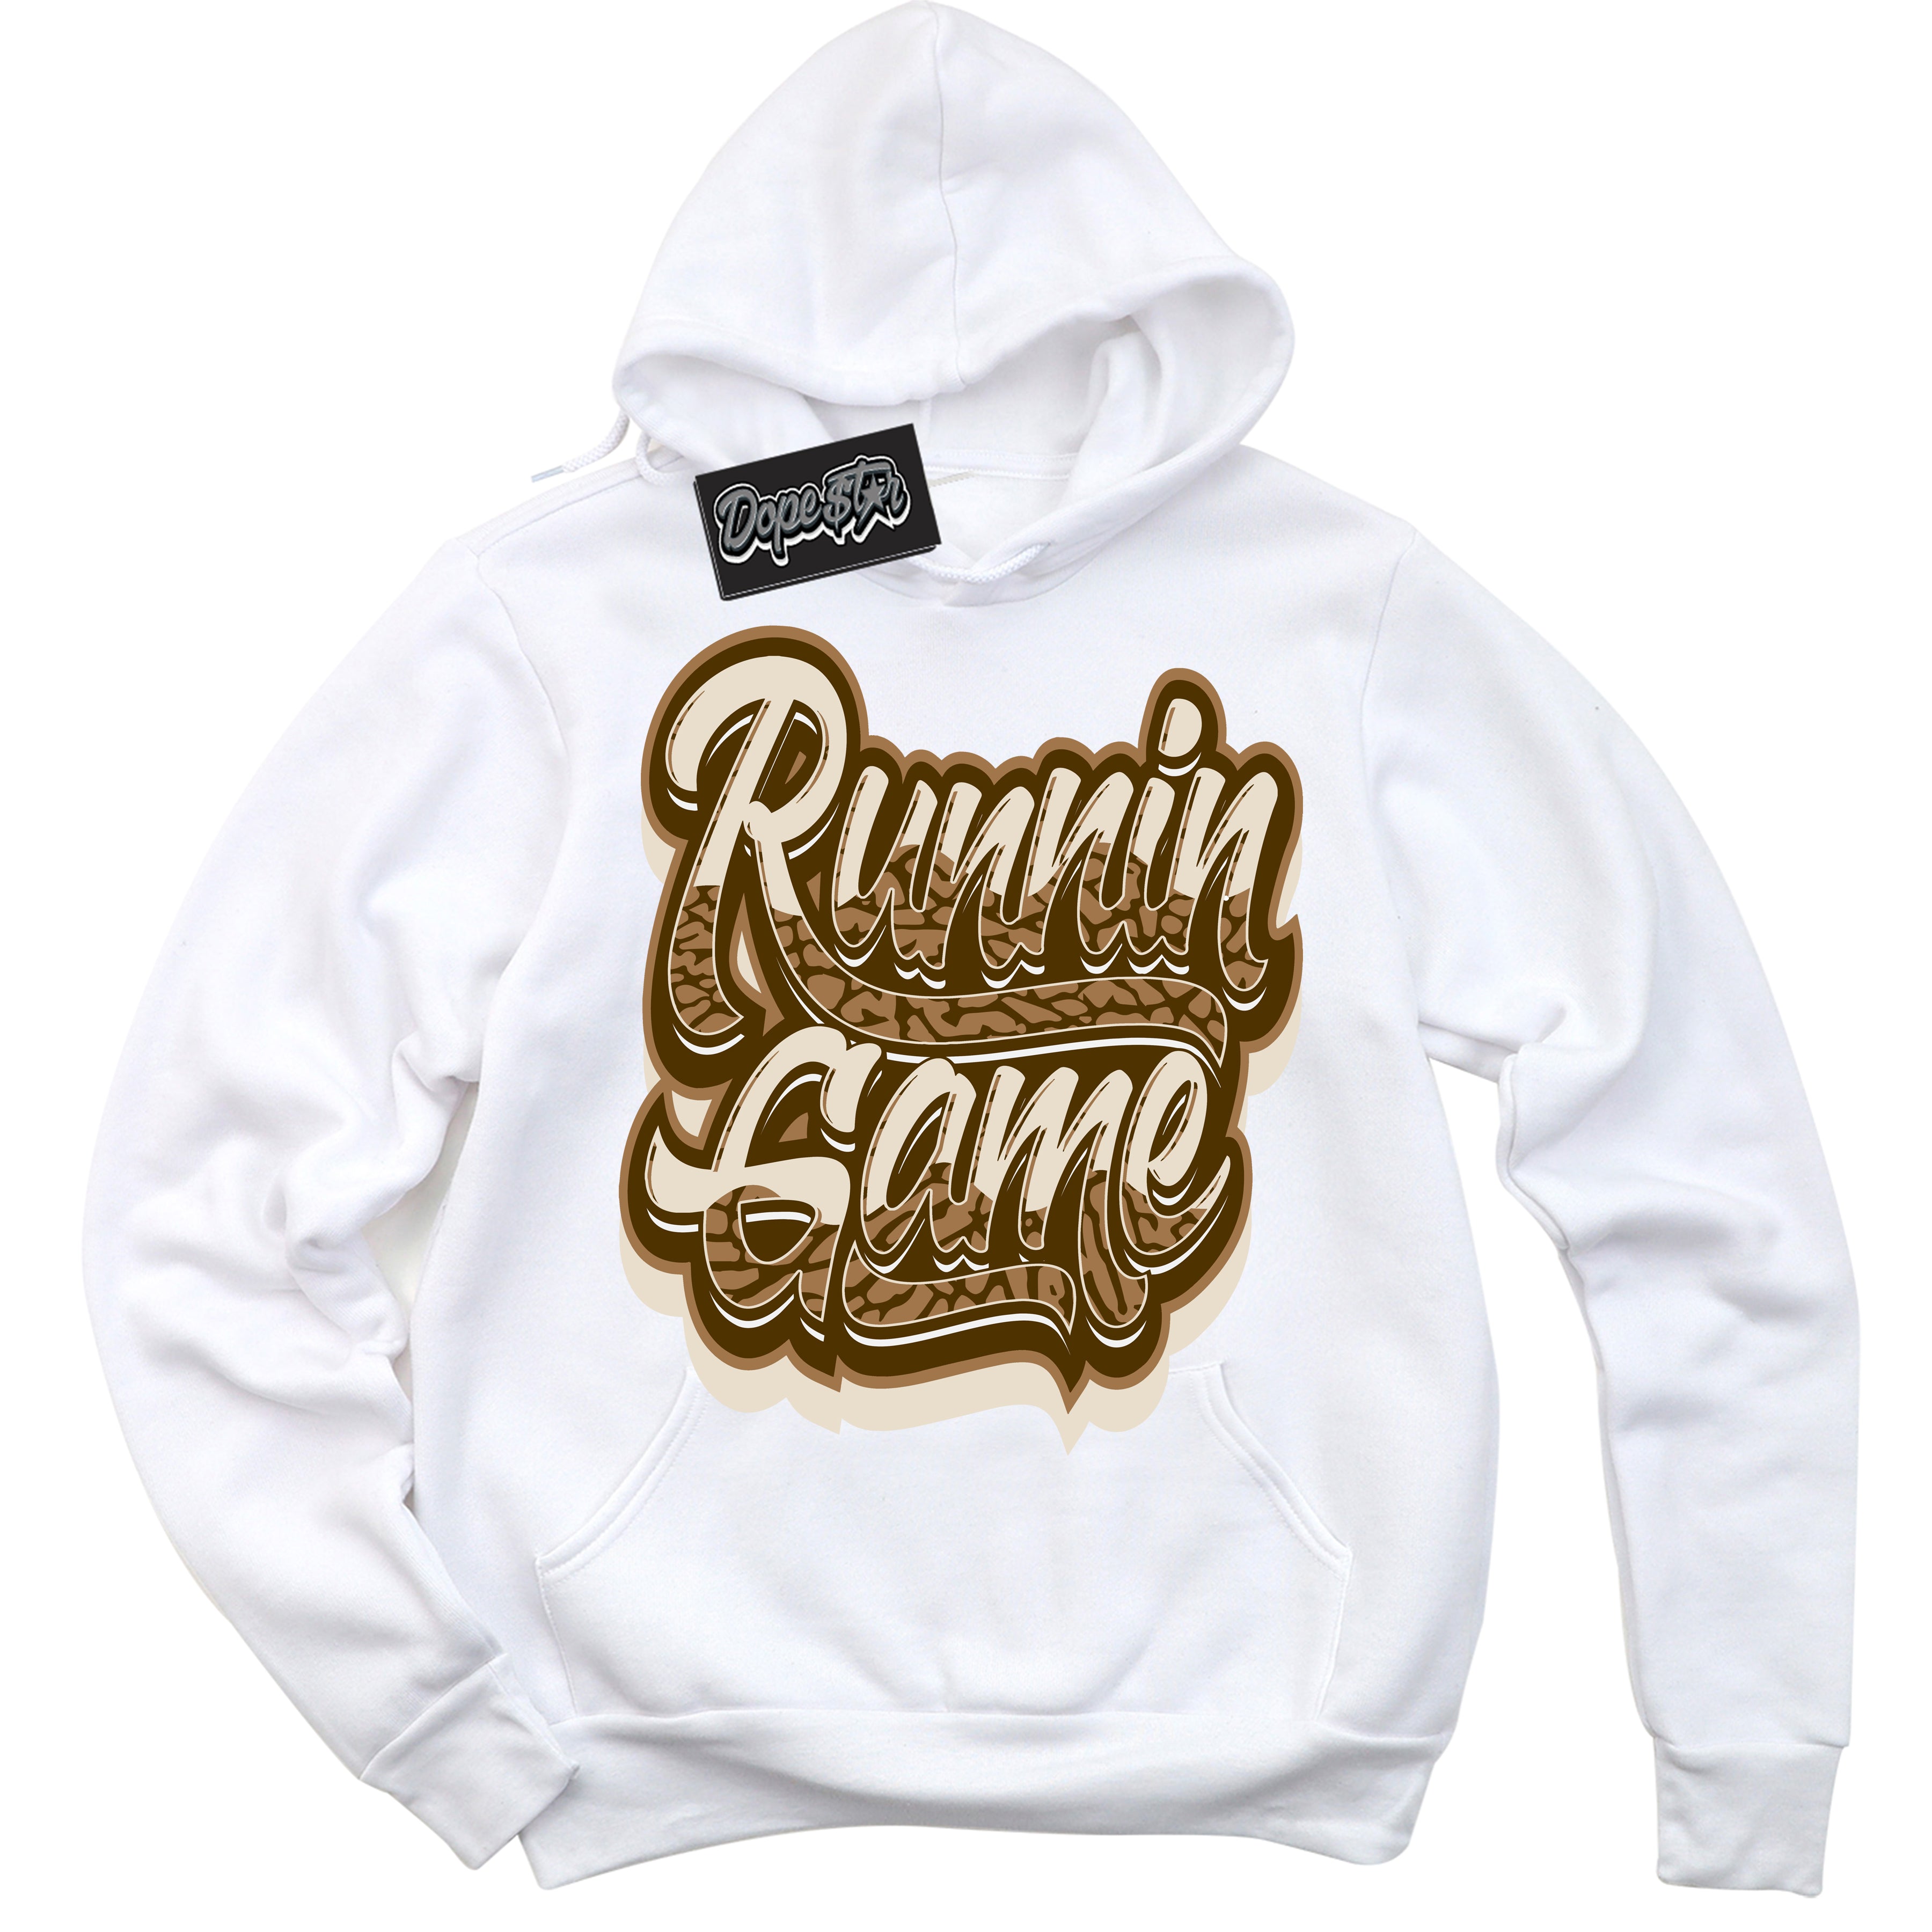 Cool White Graphic DopeStar Hoodie with “ Running Game “ print, that perfectly matches Palomino 3s sneakers